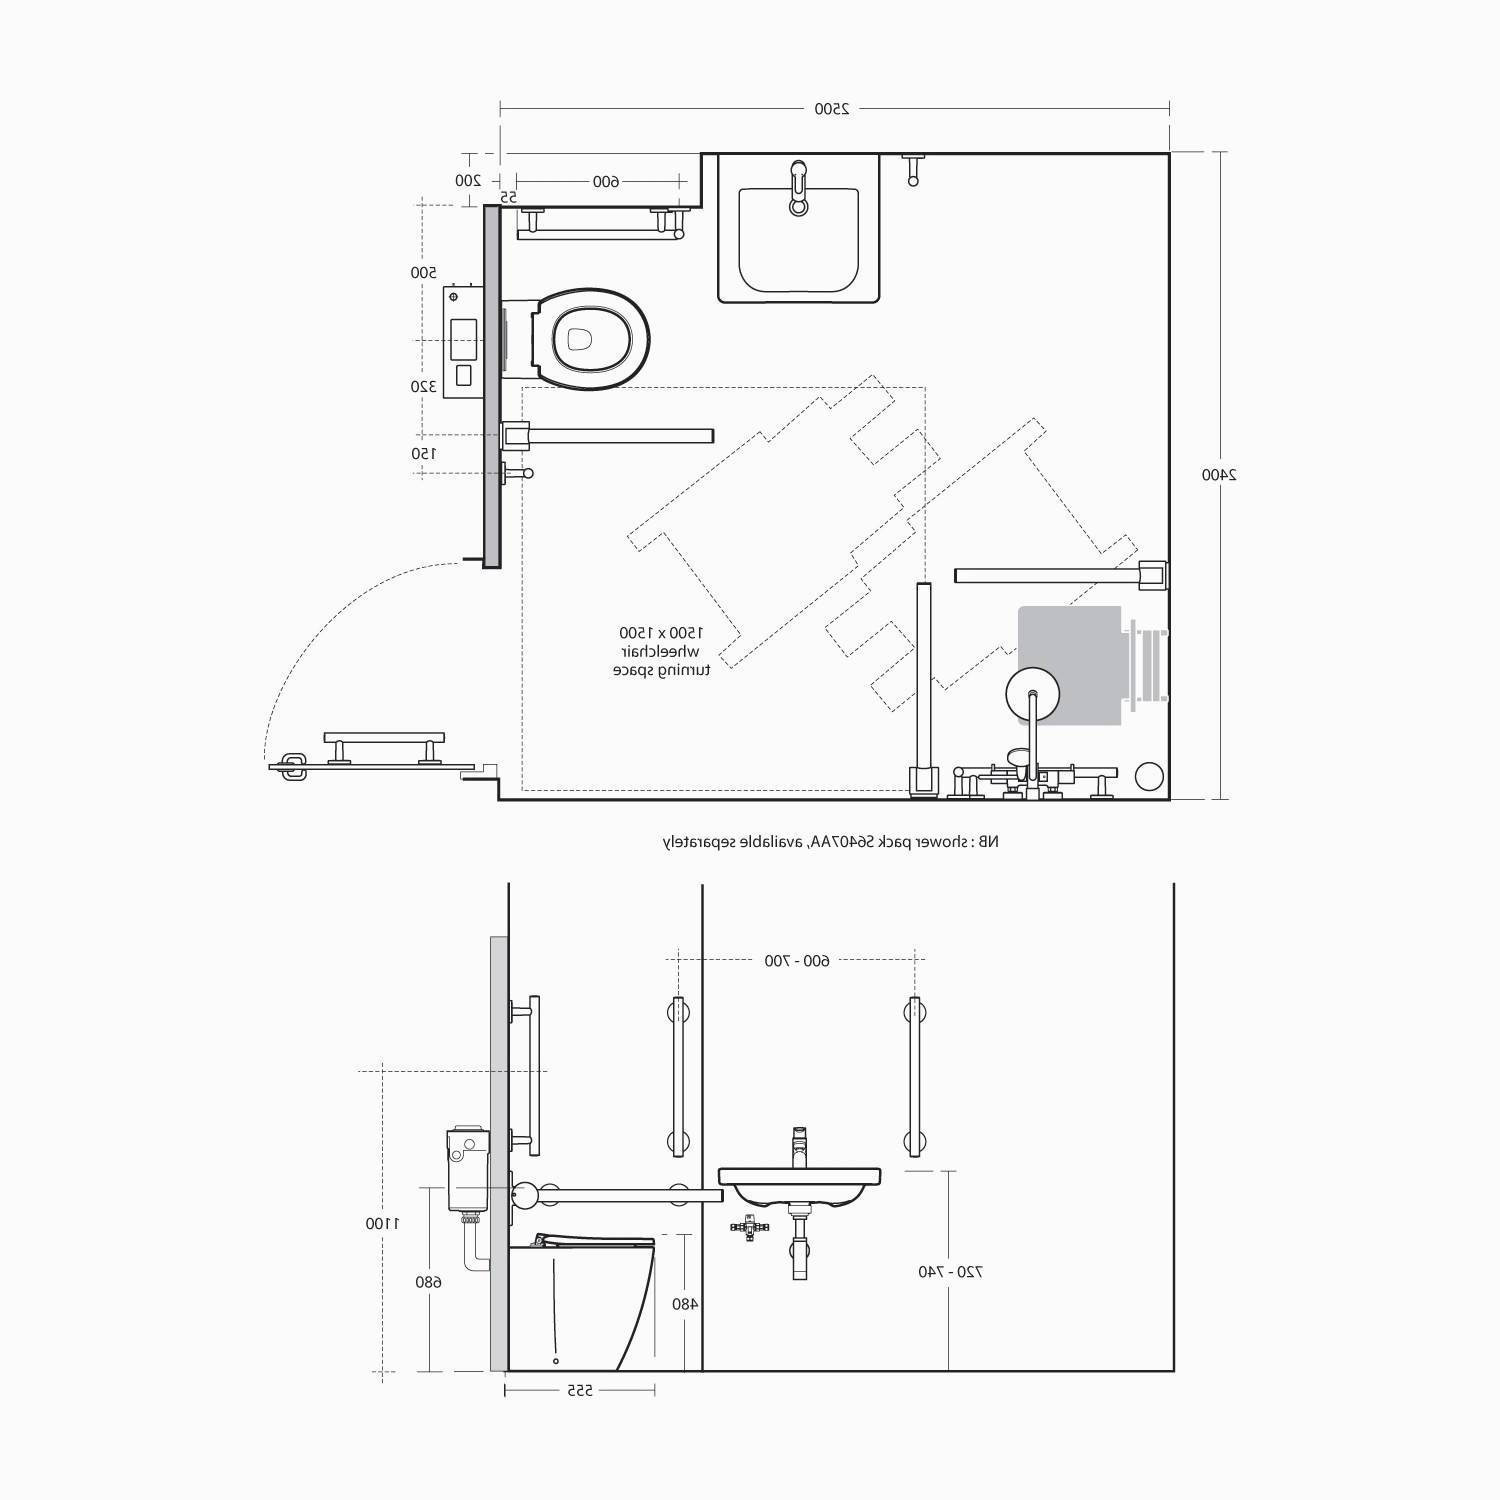 20 Fabulous Very Large Floor Vases 2024 free download very large floor vases of dsc floor plan bulk wedding decorations dsc h vases square with regard to dsc floor plan 19 fresh small guest house plans frit fond